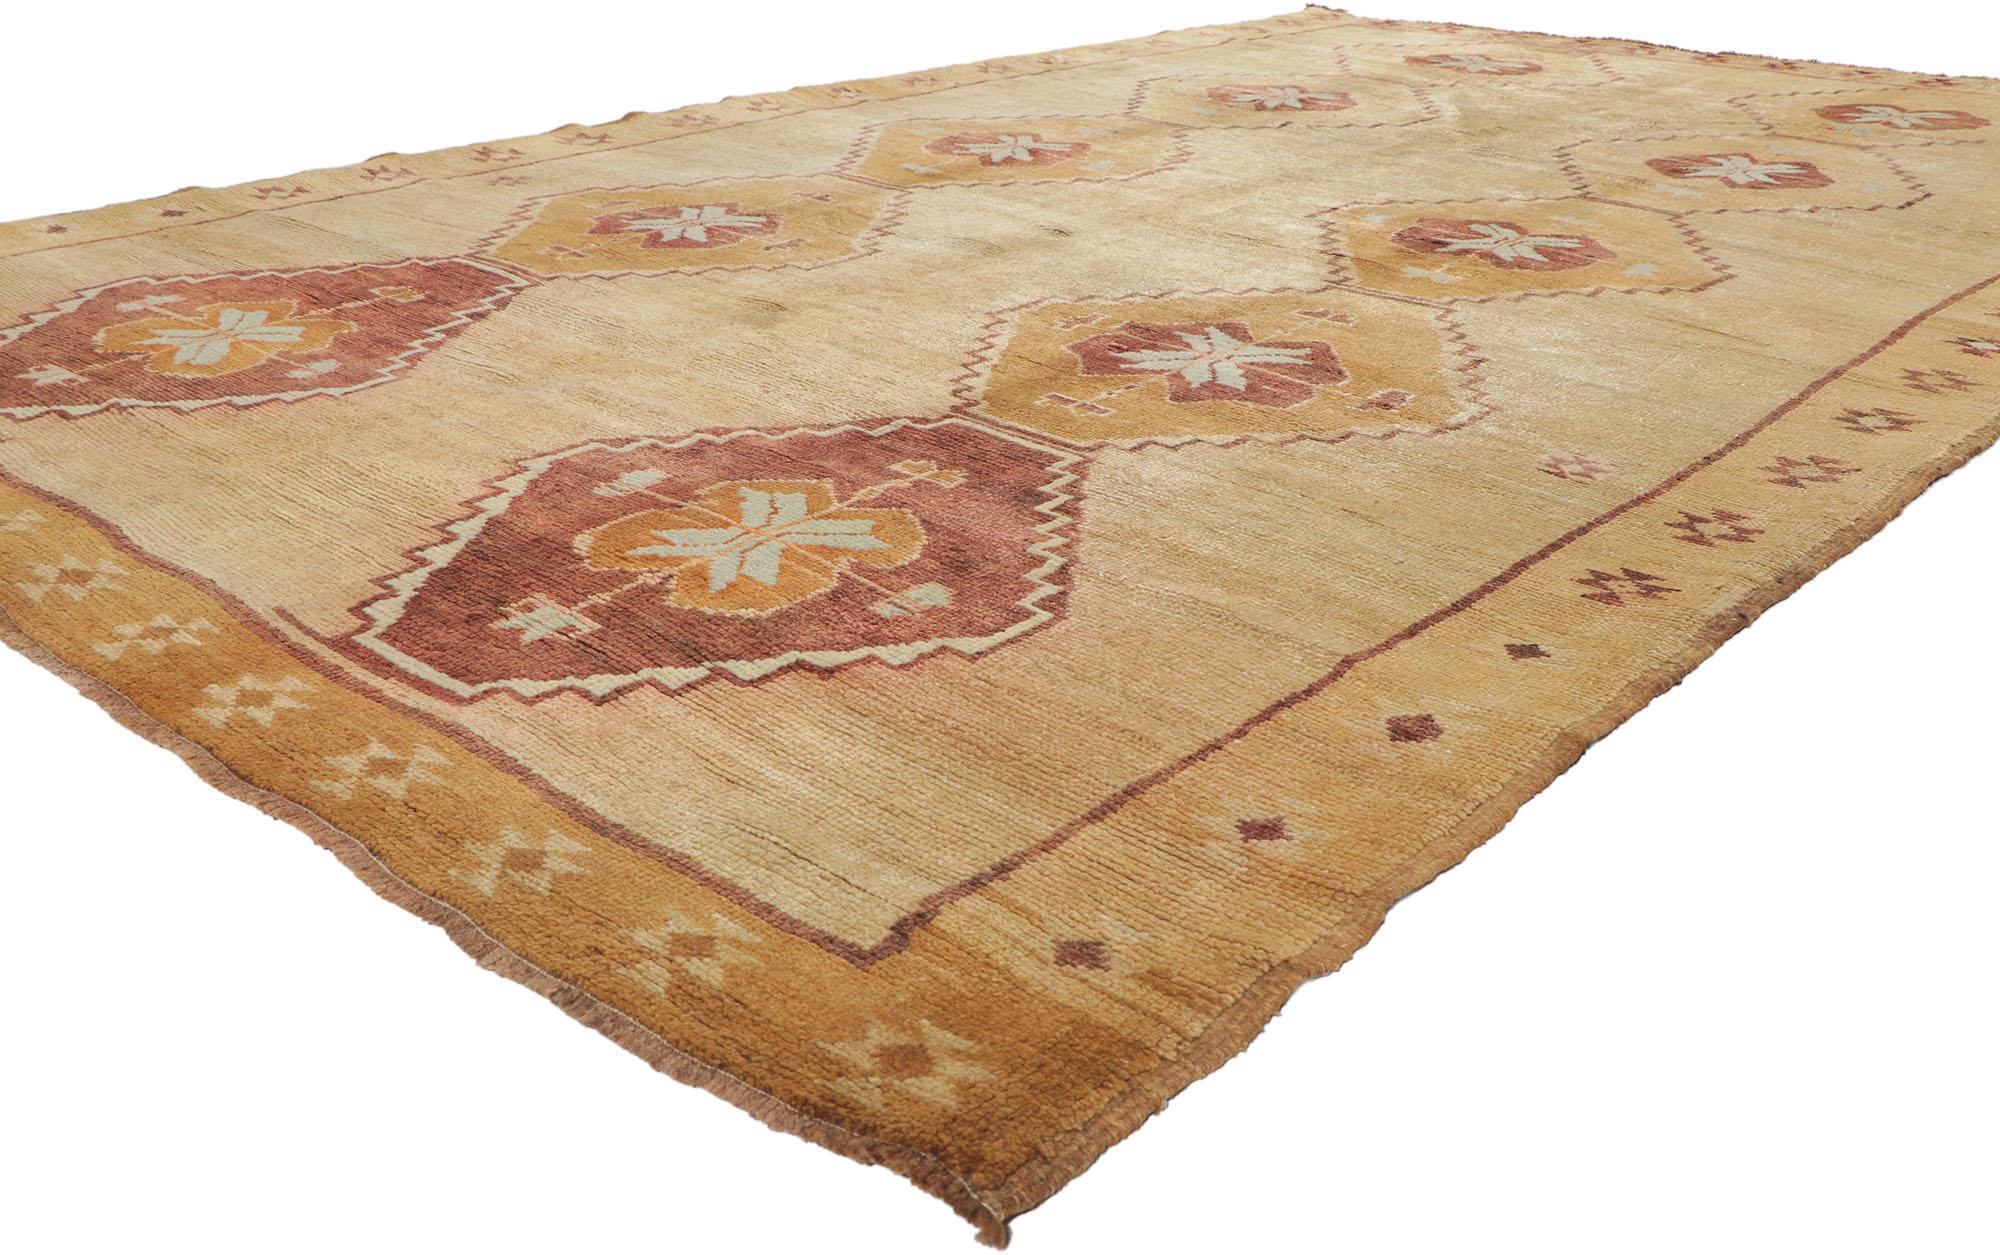 50379 Earth-Tone Vintage Turkish Kars Rug, 07'06 X 11'10. ​In the heartland of northeastern Turkey, where the ancient city of Kars whispers tales of tradition and craftsmanship, skilled artisans weave magic into every thread of these exquisite